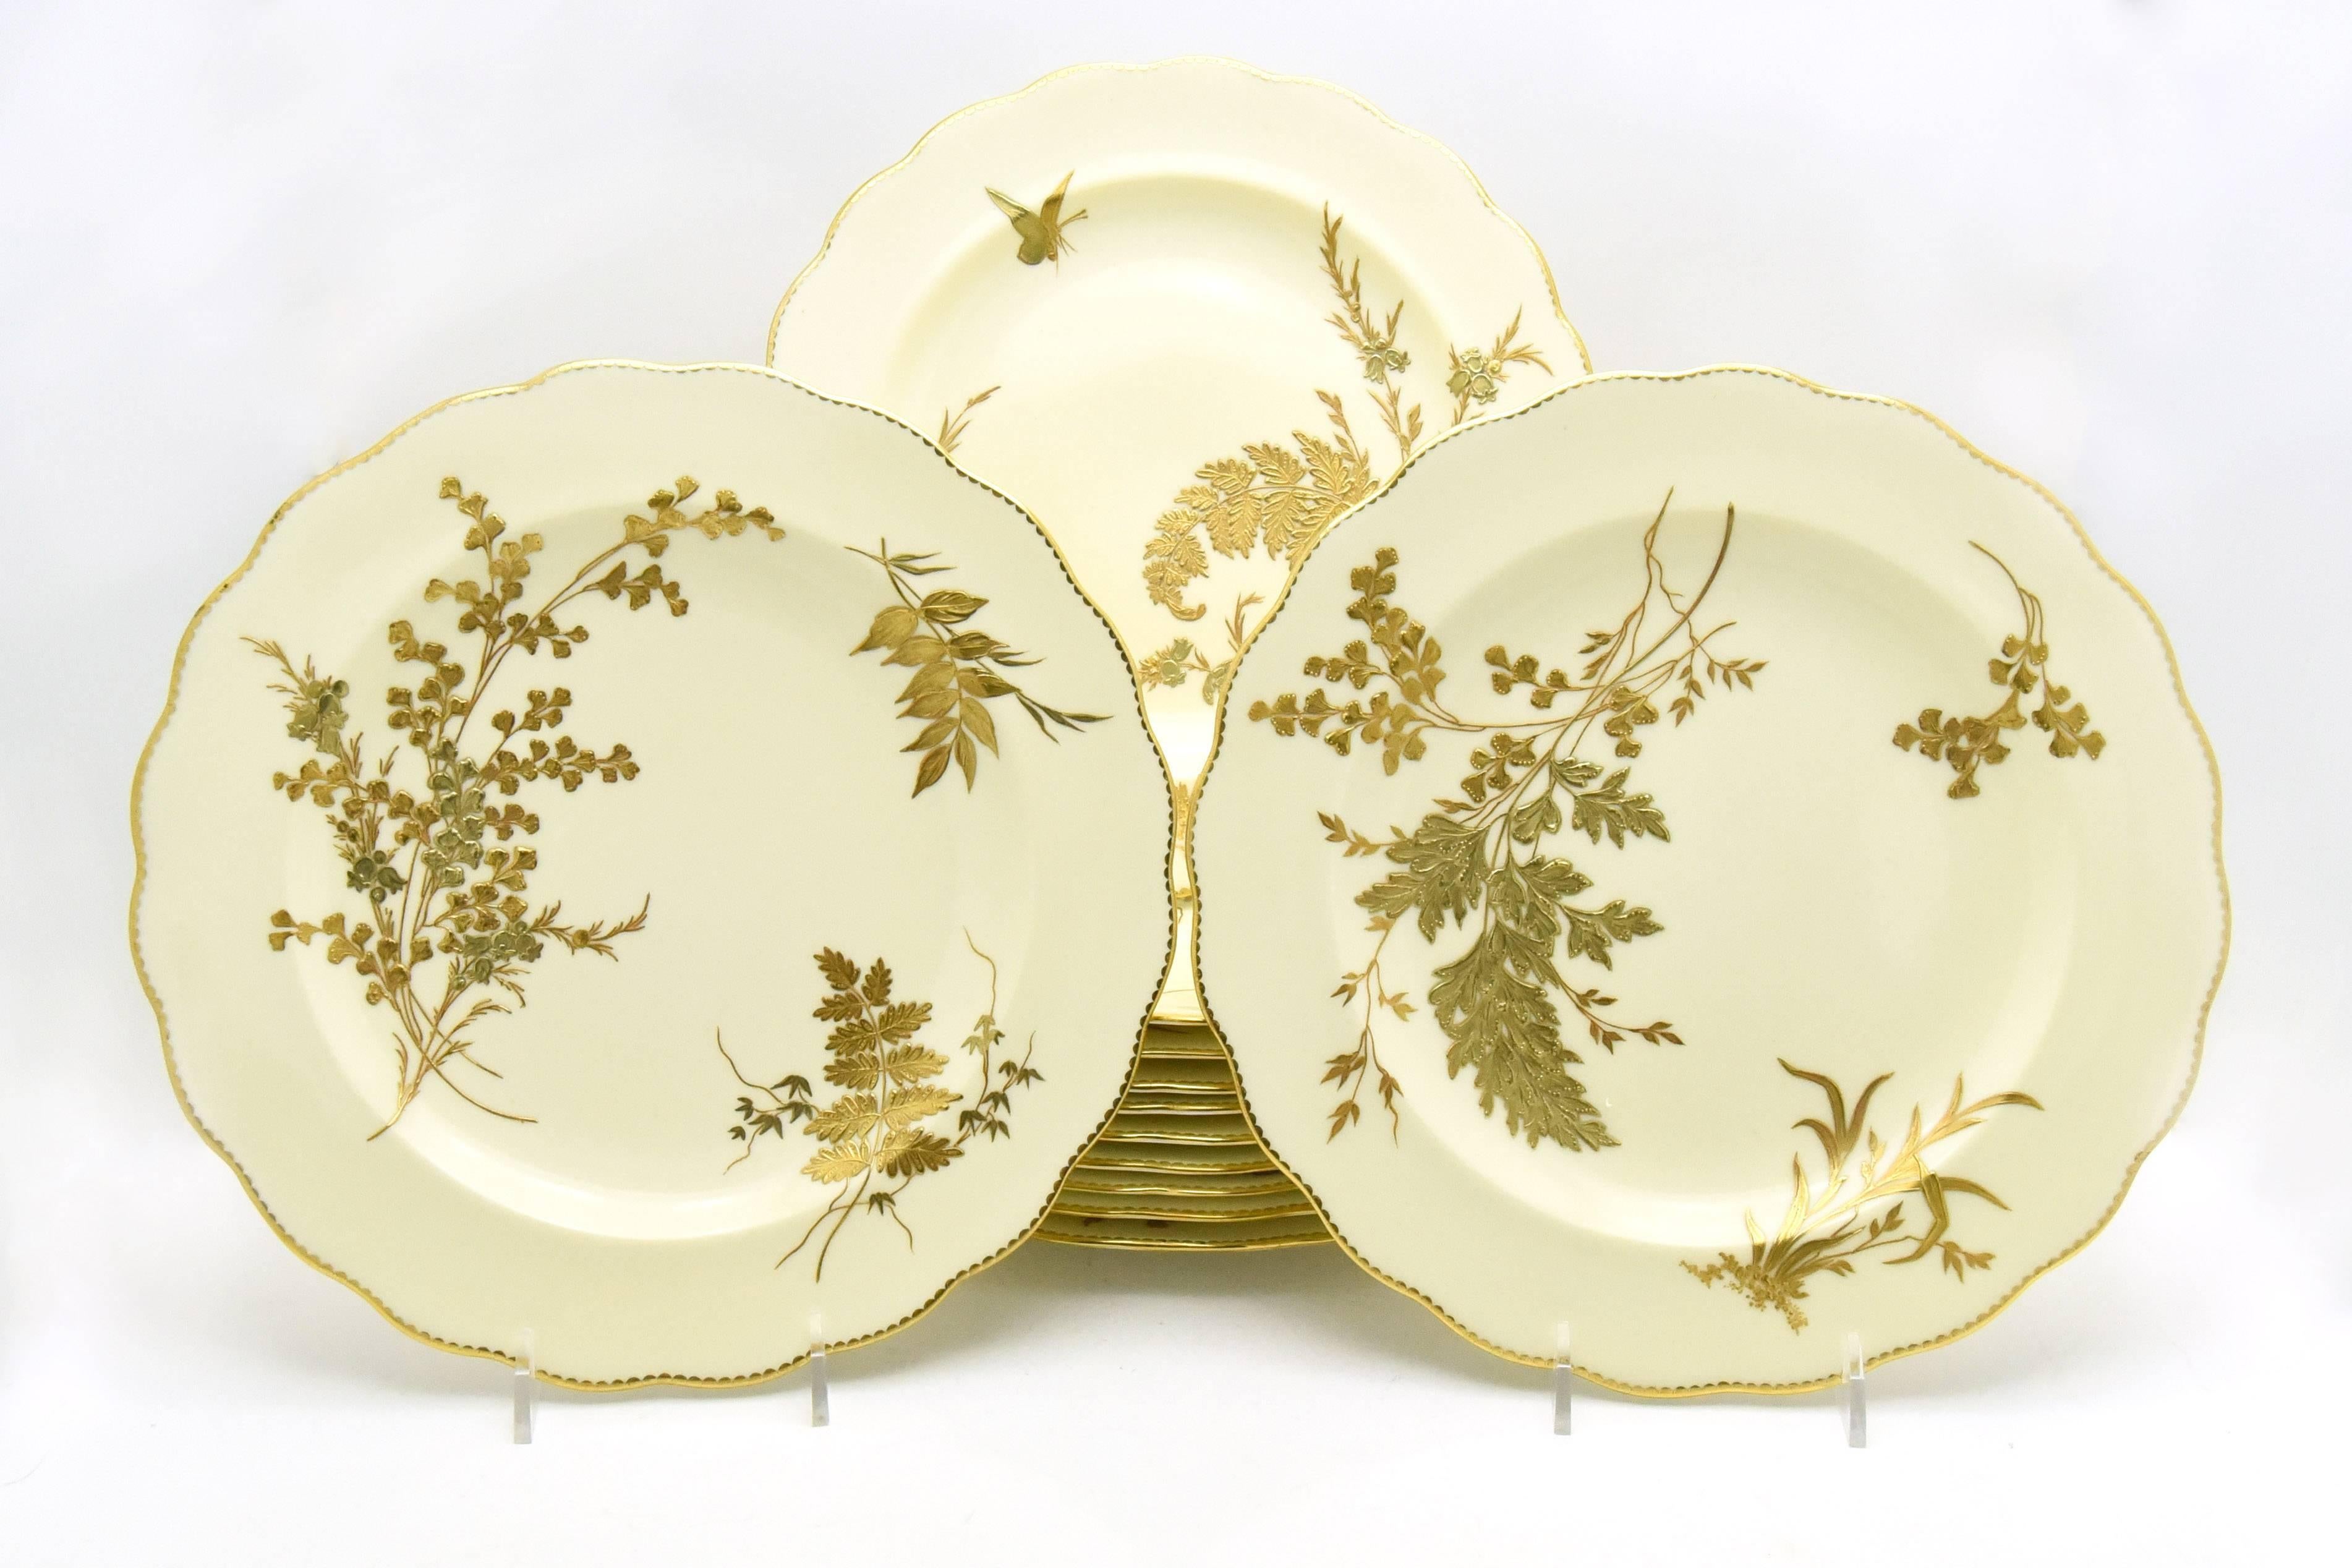 This is a set of 12 extraordinary 19th century aesthetic movement dessert size cabinet plates, made by Brownfield's for Tiffany's, New York. These beautiful works of art speak for themselves in their iconic subject matter. Each one is uniquely